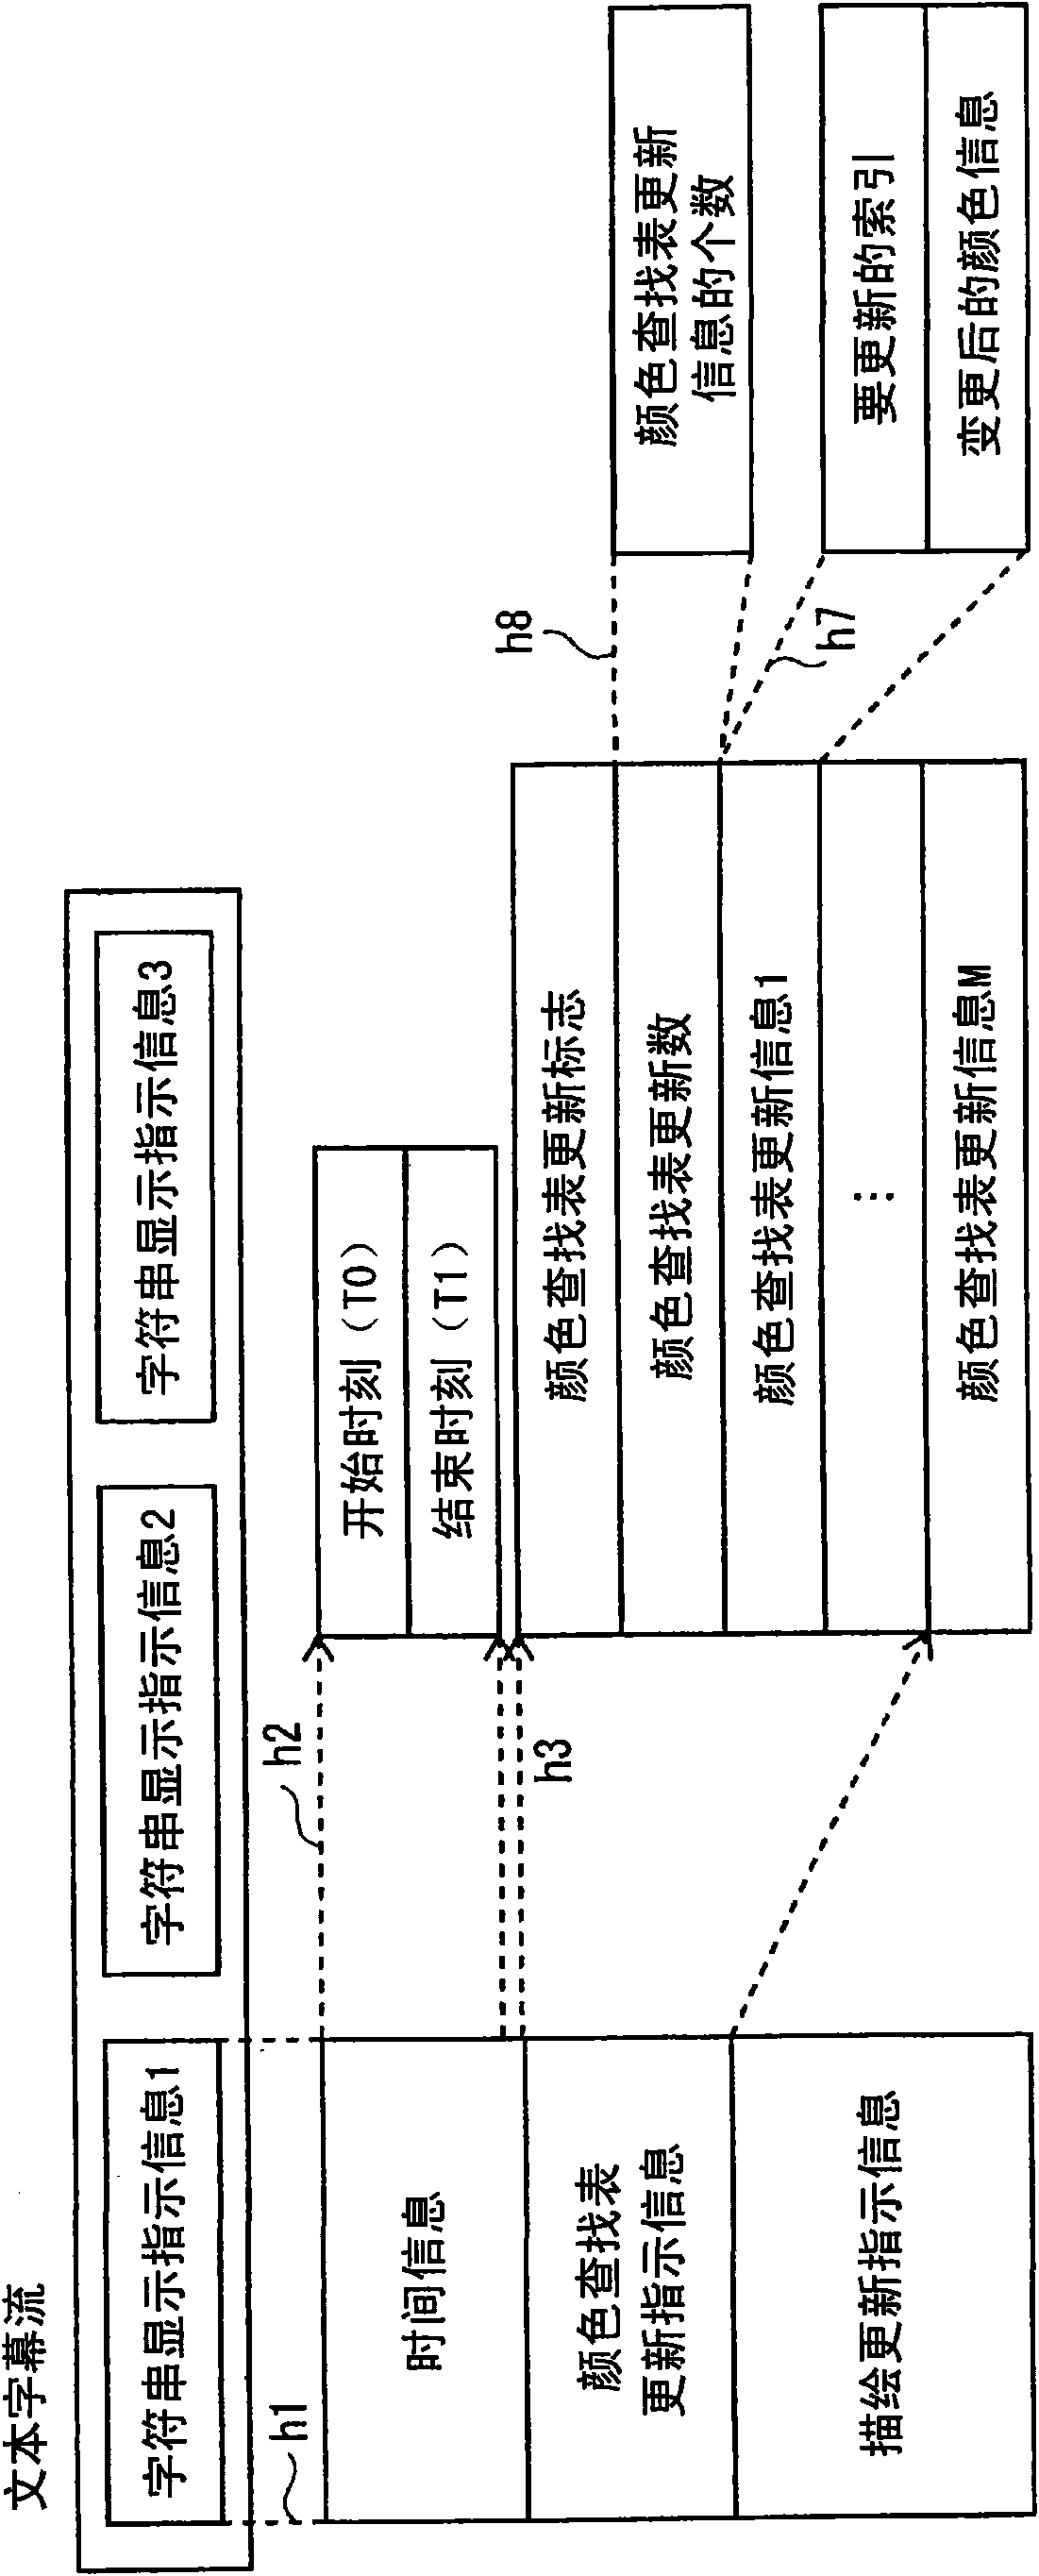 Reproduction device, integrated circuit, reproduction method, program, and computer-readable recording medium